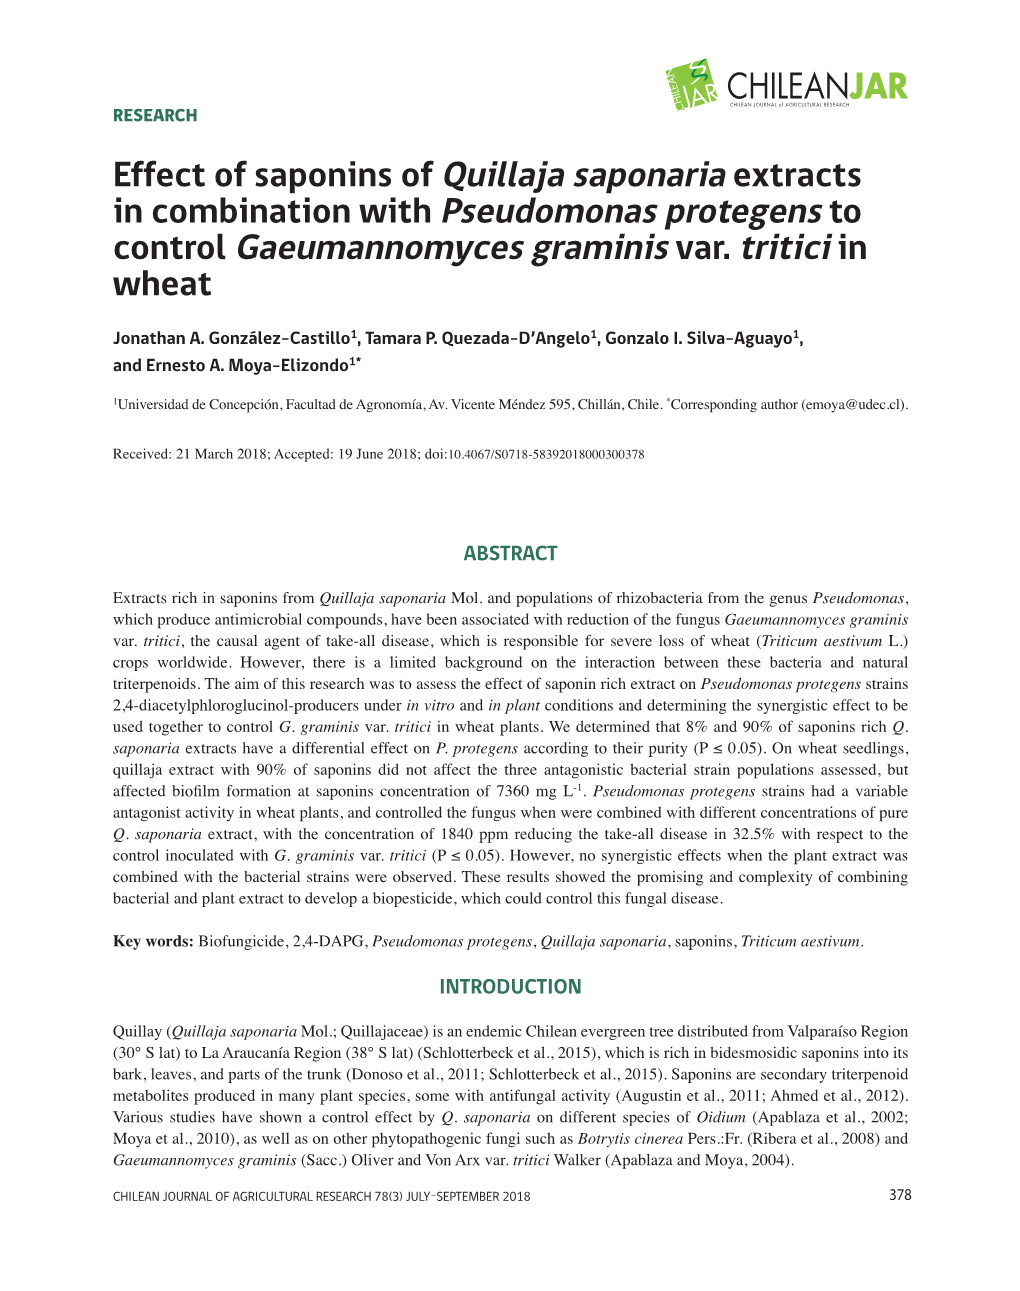 Effect of Saponins of Quillaja Saponaria Extracts in Combination with Pseudomonas Protegens to Control Gaeumannomyces Graminis Var